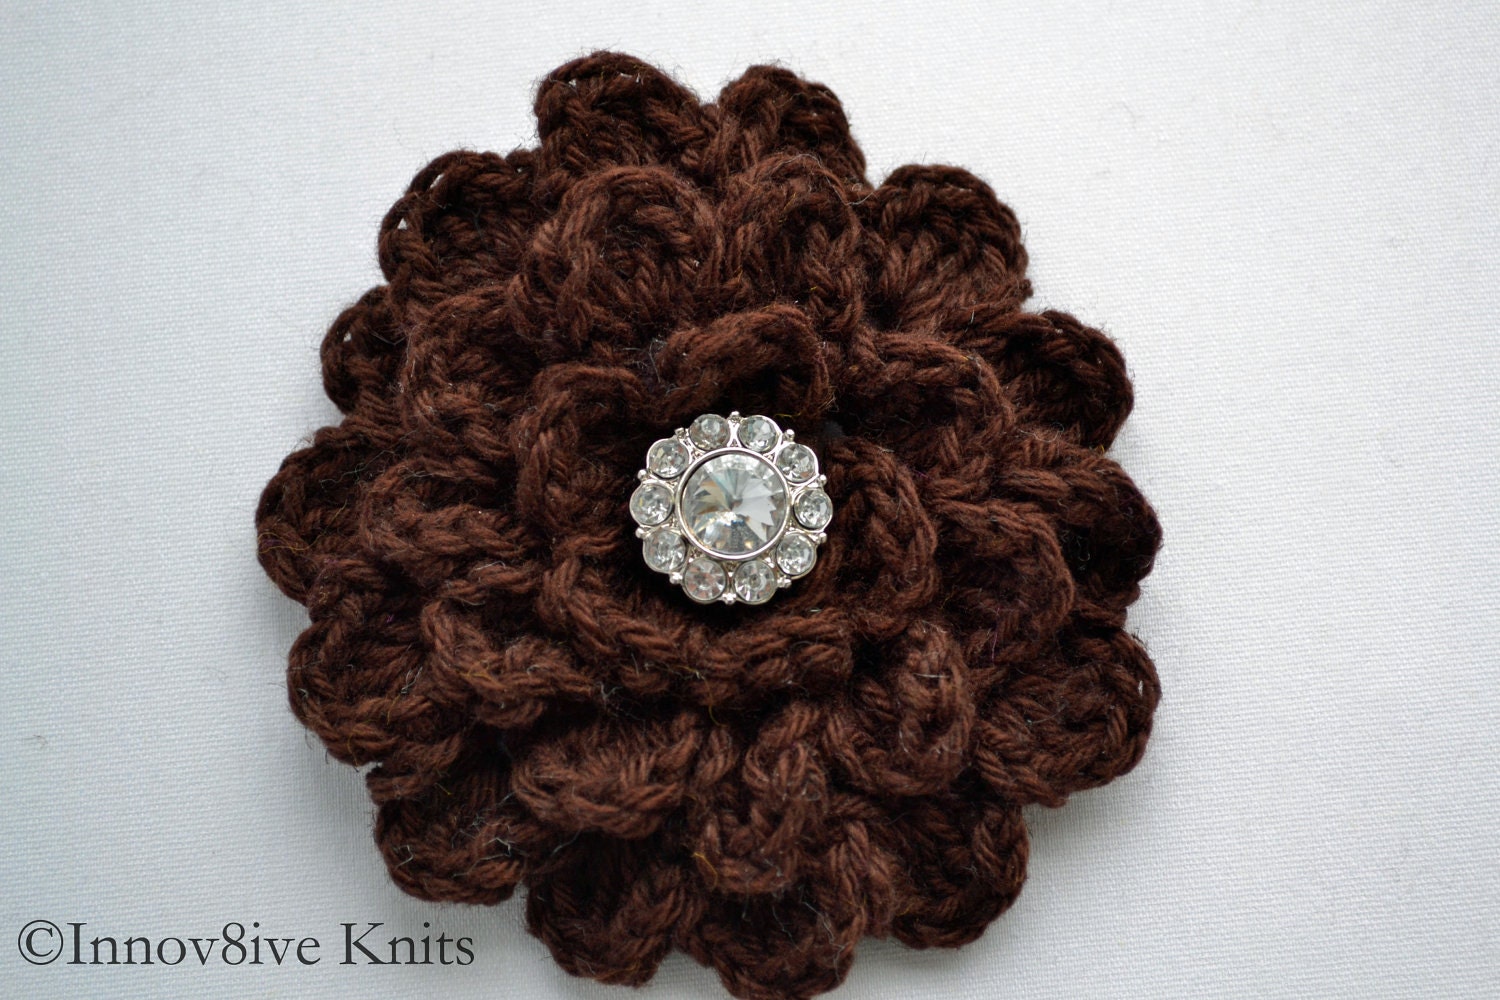 Crochet Flower Hair Clip With Rhinestone Center In Coffee Chocolate Brown Made From a Cotton and Linen Blend Yarn